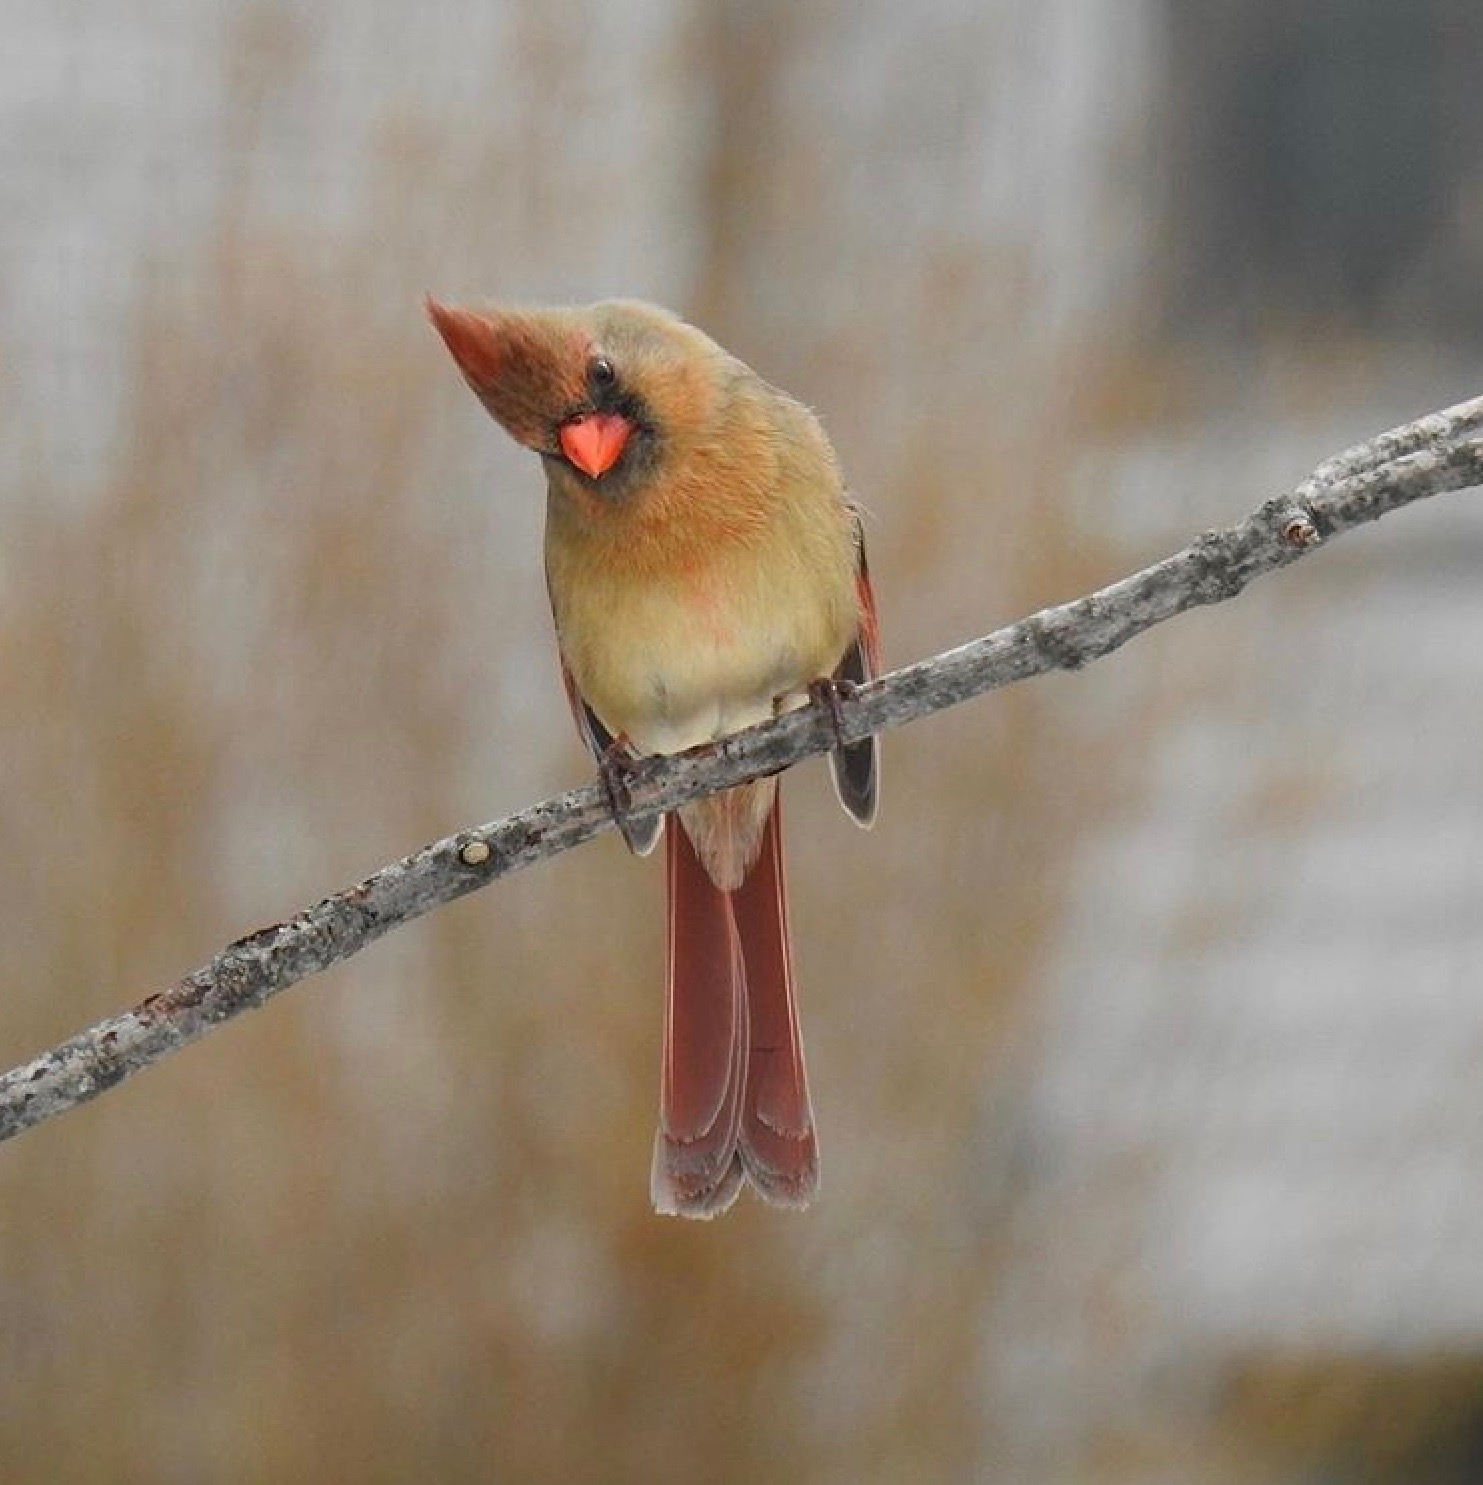 If you're into birds then you'll love the female Northern Cardinal